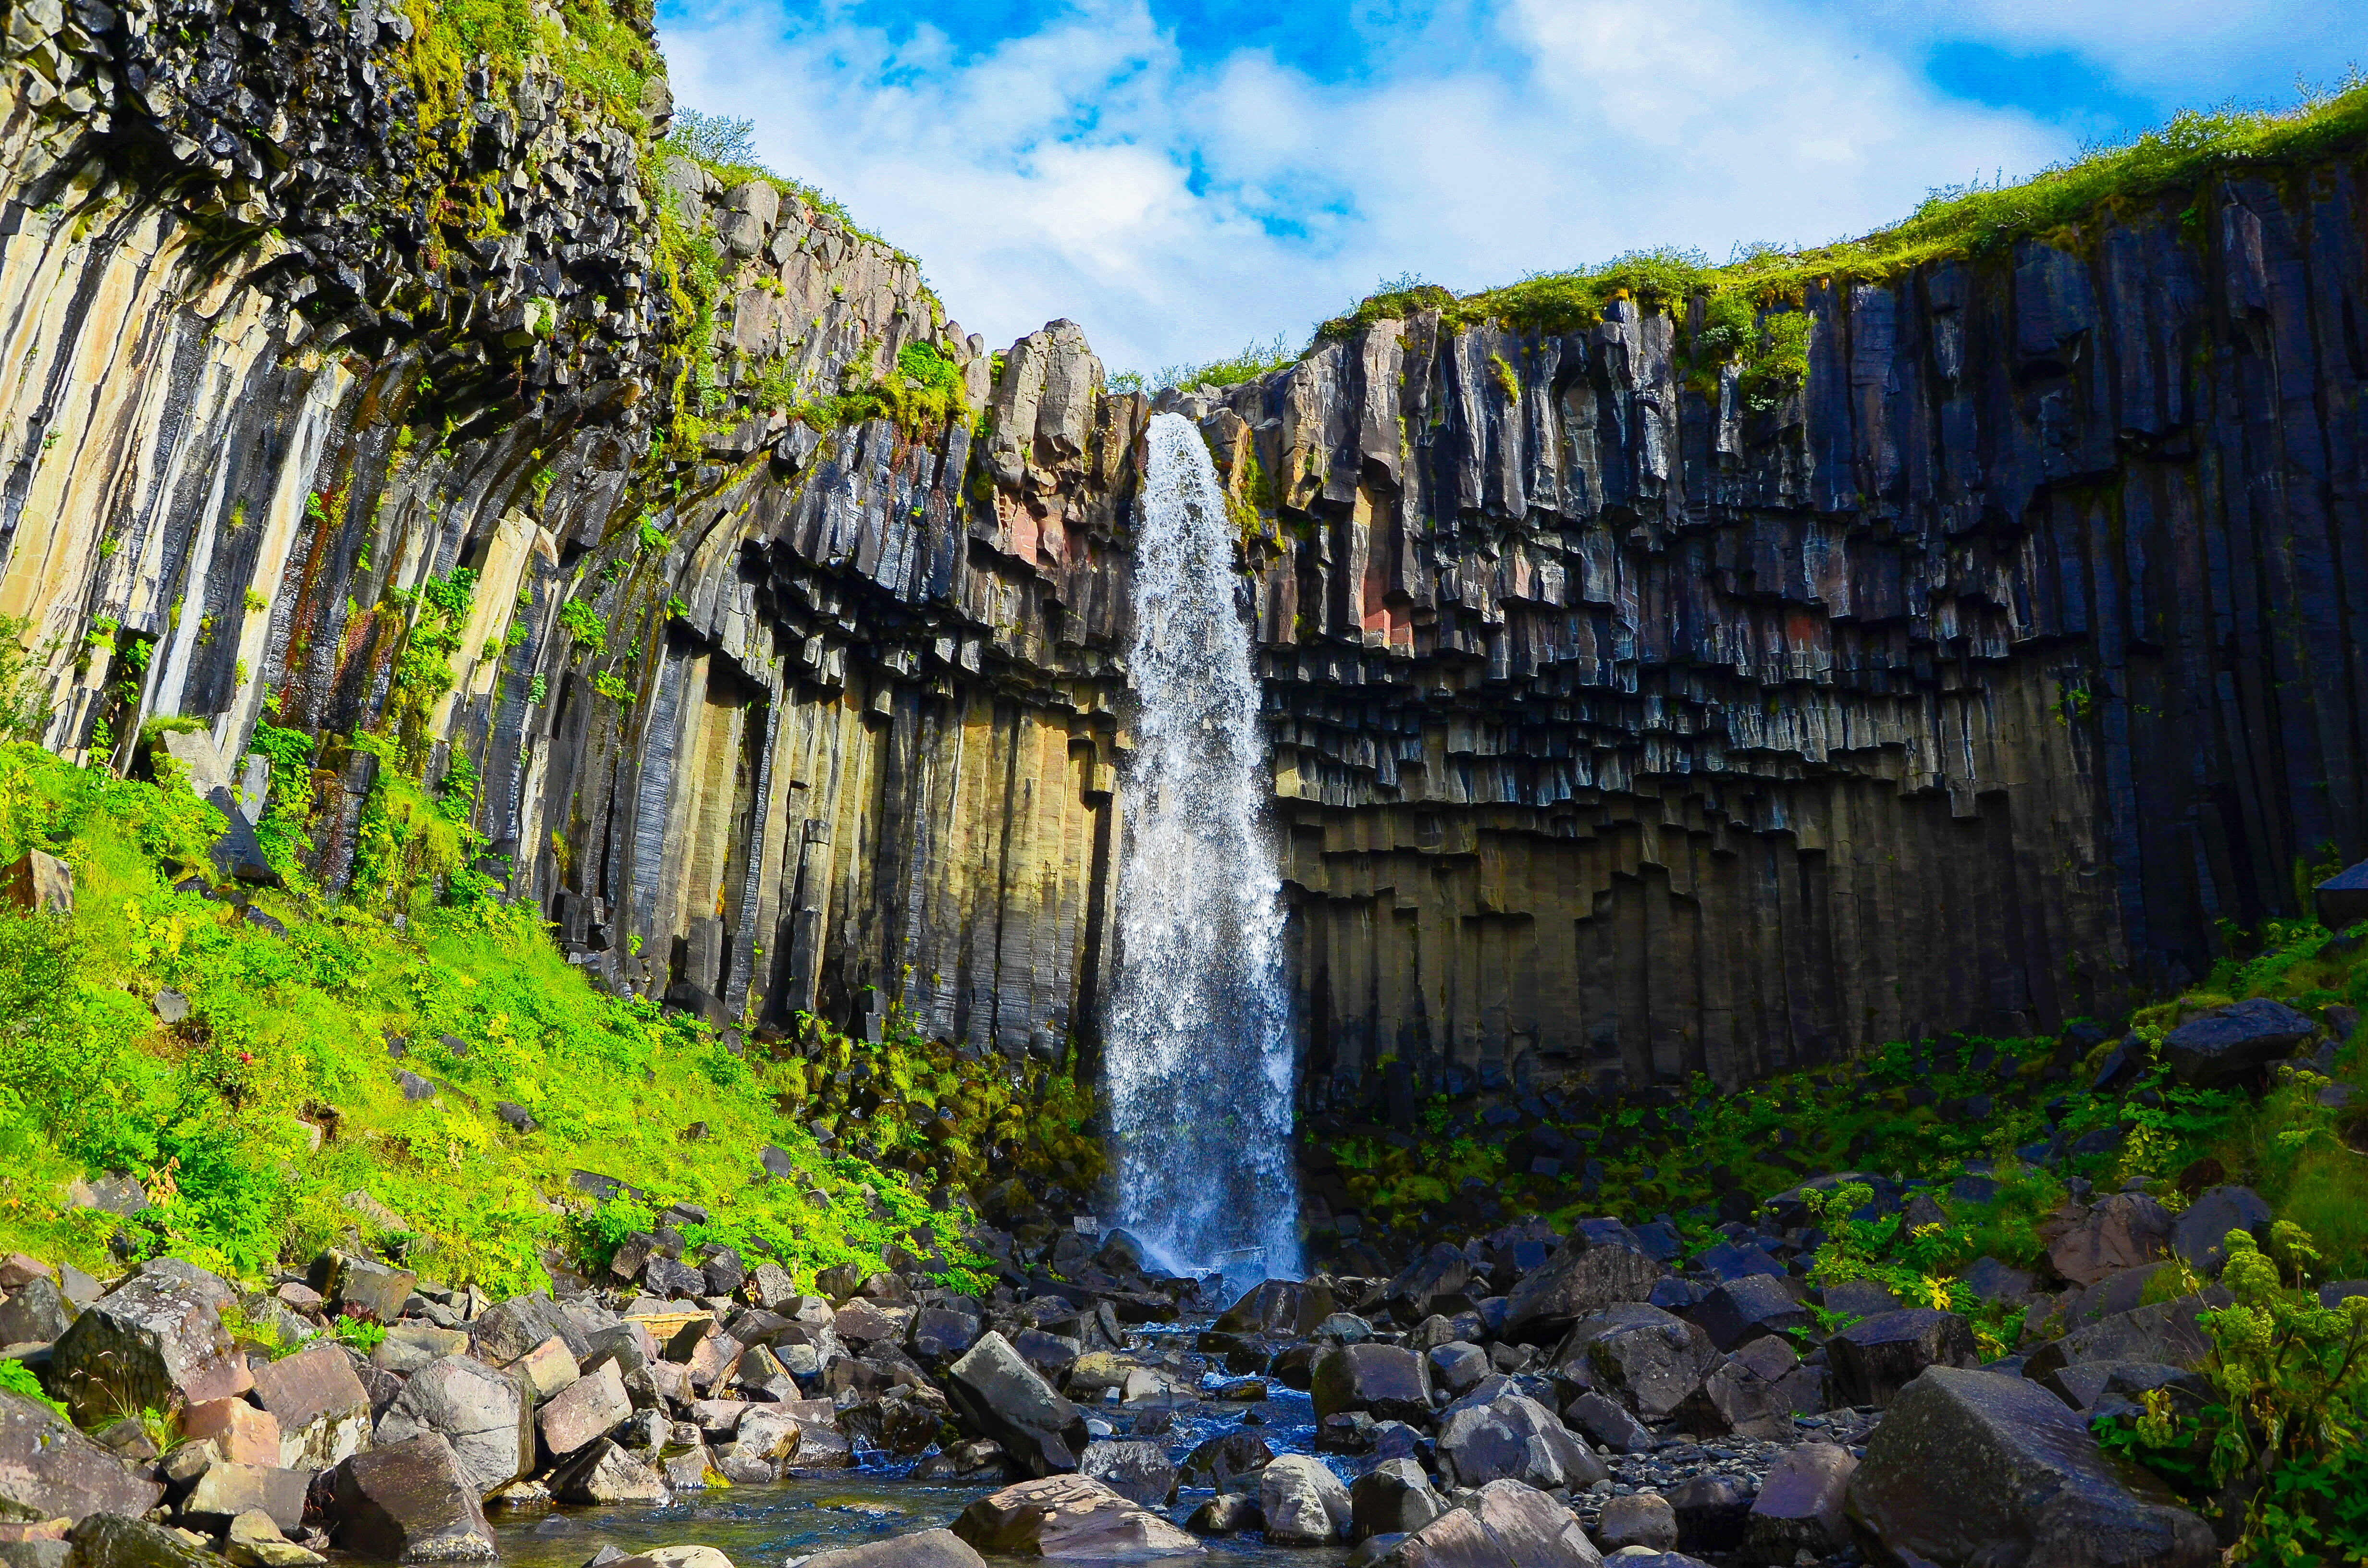 landscape photography of water falls surrounded by green plants under by cirrus clouds